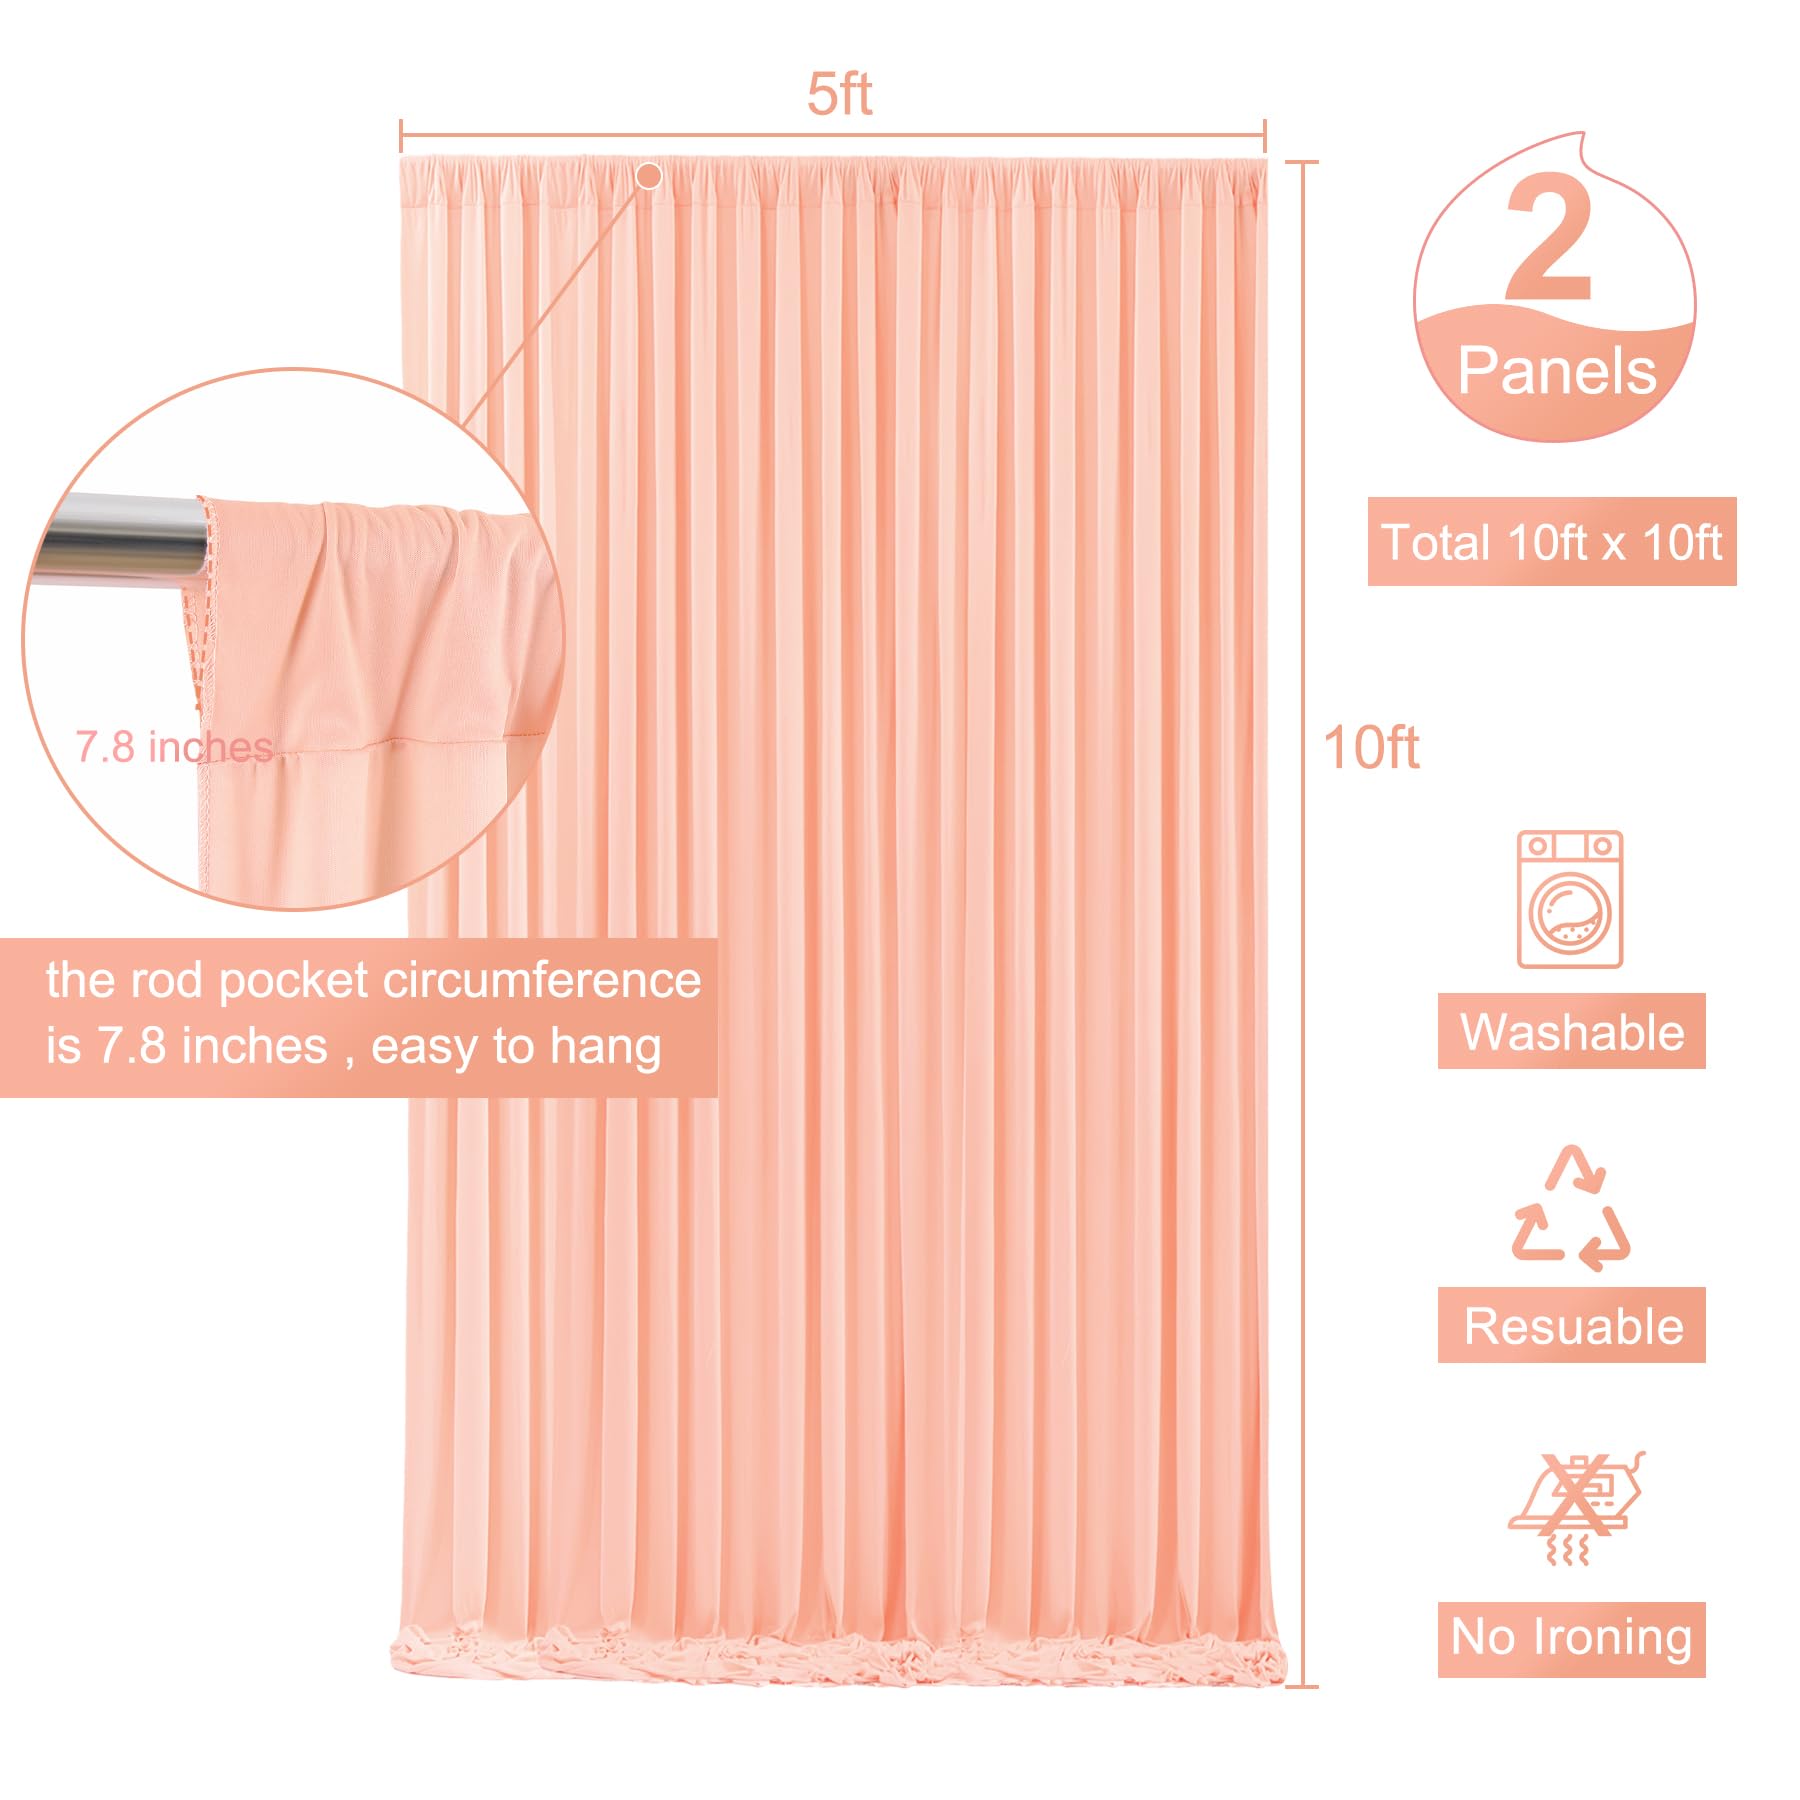 10x10 Peach Backdrop Curtain for Parties Baby Shower Wrinkle Free Peach Photo Curtains Backdrop Drapes Fabric Decoration for Wedding Birthday Party 5ft x 10ft,2 Panels